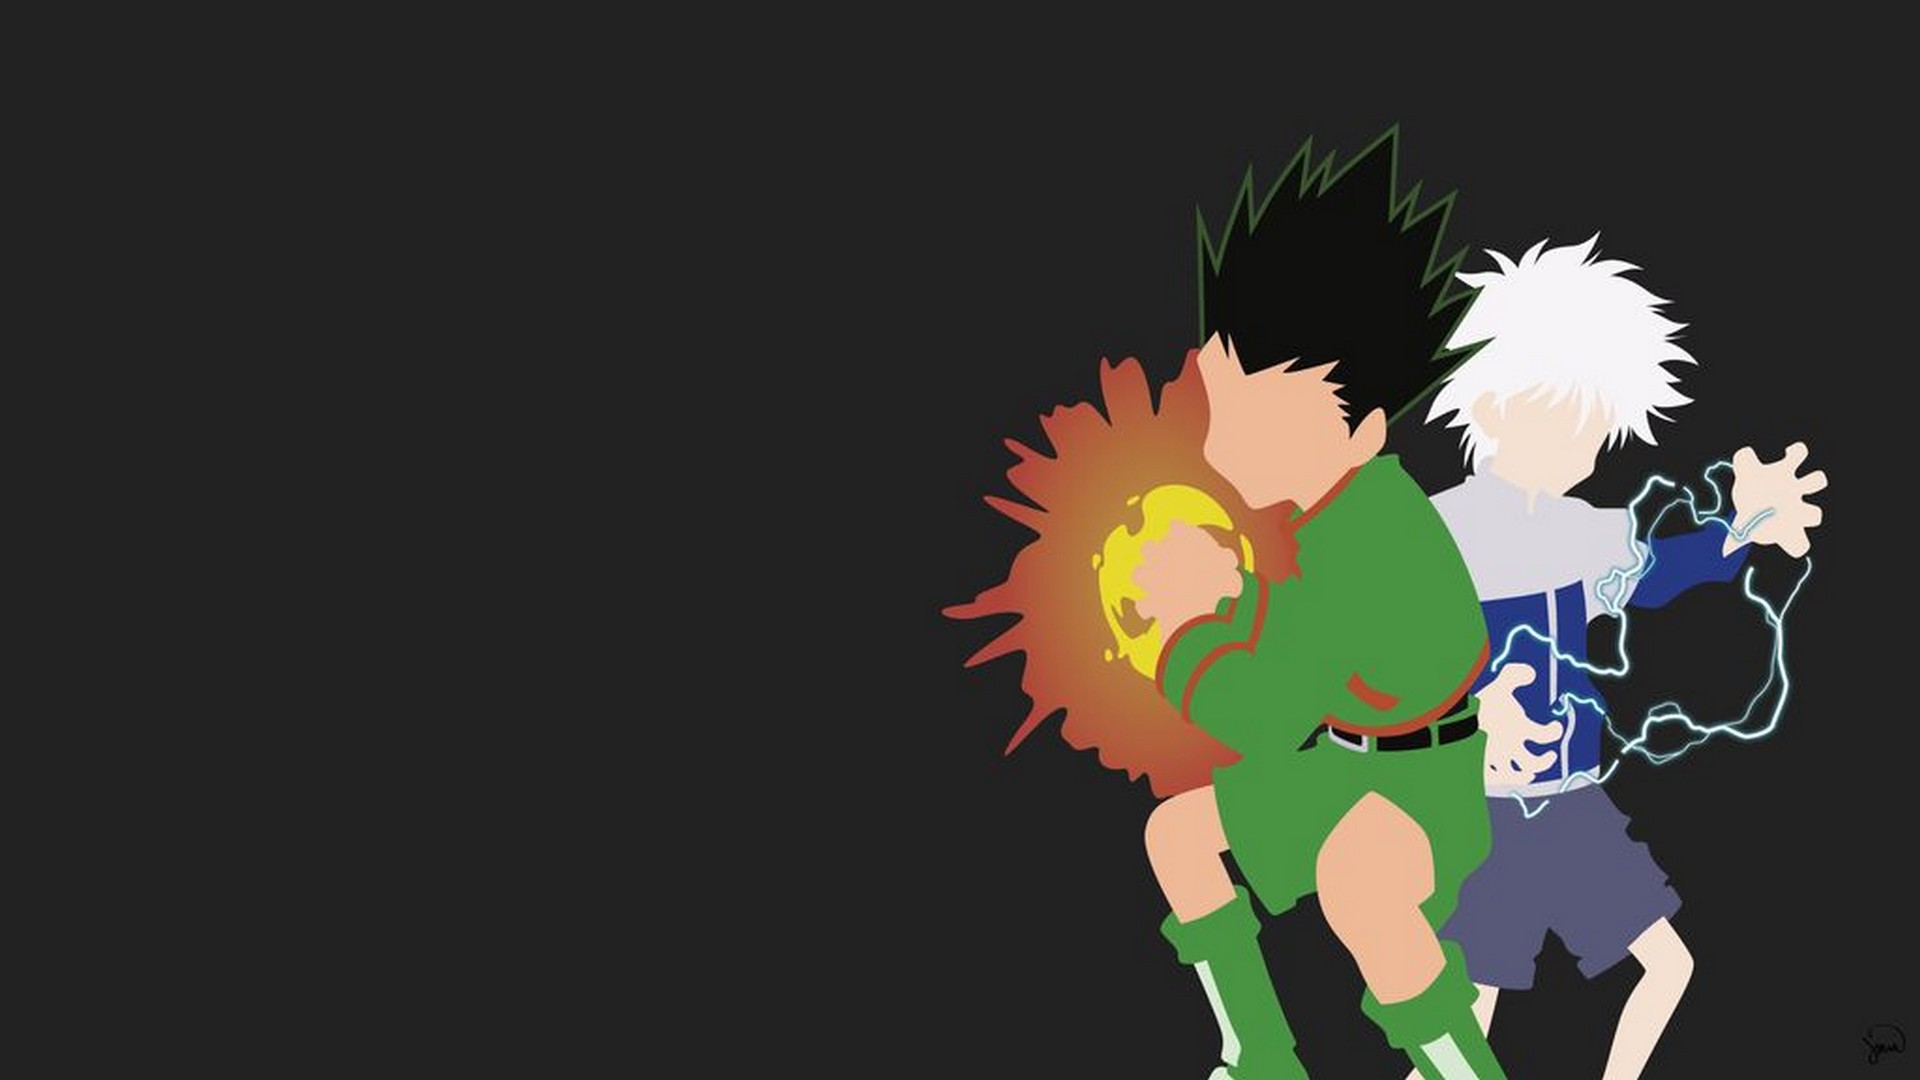 Wallpaper HD Gon And Killua with high-resolution 1920x1080 pixel. You can use this wallpaper for your Desktop Computer Backgrounds, Mac Wallpapers, Android Lock screen or iPhone Screensavers and another smartphone device